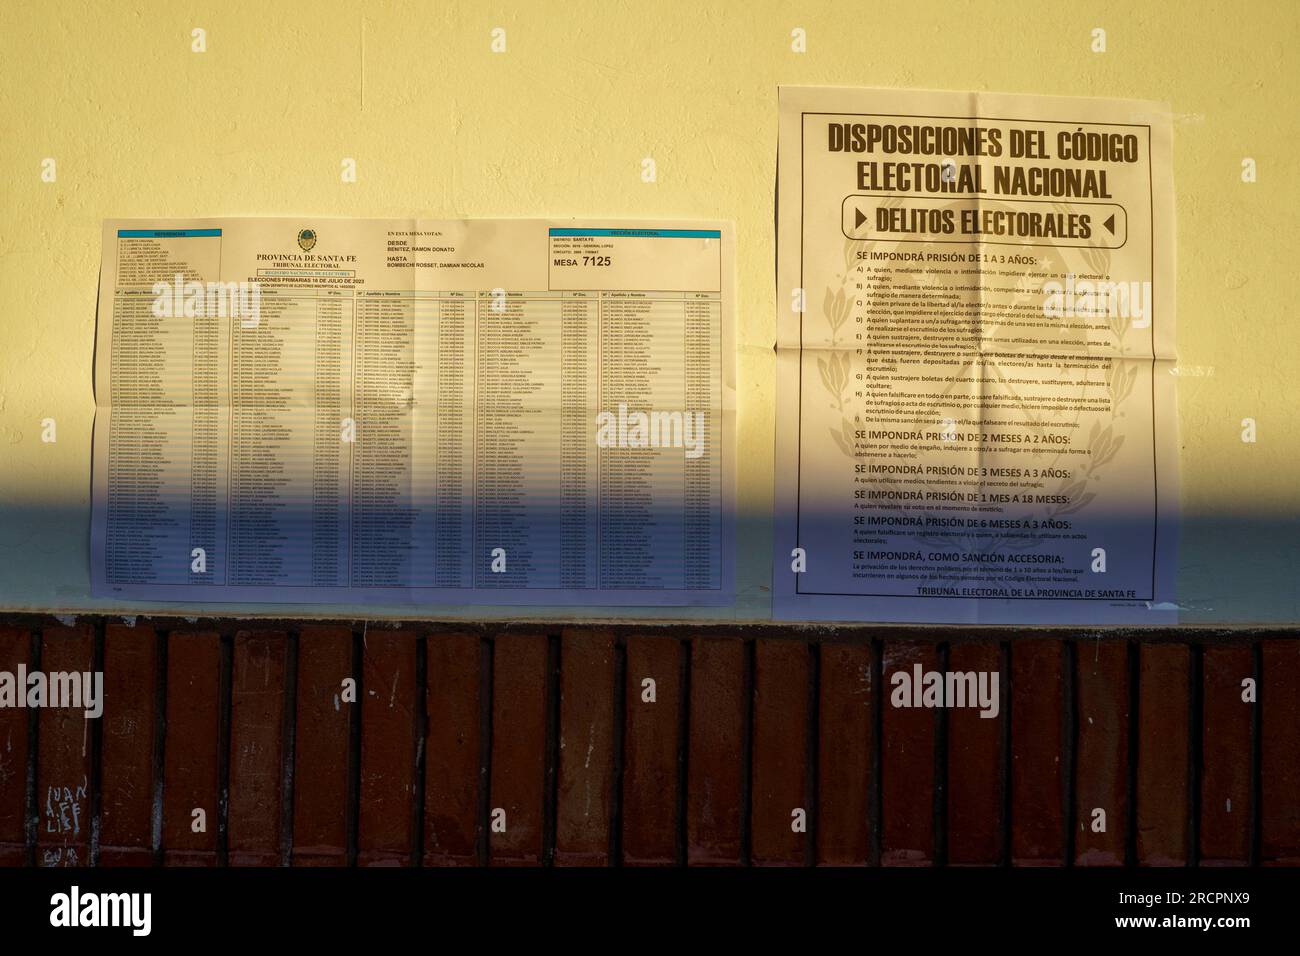 An electoral roll at a polling station in Firmat, Santa Fe at the beginning of the primary elections (PASO). This election is seen as a major test for the opposing coalition Juntos por el Cambio, with Presidential candidates Horacio Rodriguez Larreta and Patricia Bullrich supporting two candidates for Governor, Maximiliano Pullaro and Carolina Losada respectively, that have engaged in a battle that escalated to the point of accusing Pullaro of complicity with drug dealers when he was Ministry of Security.Citizens in the Province of Santa fe will have to vote no less than four times this year, Stock Photo